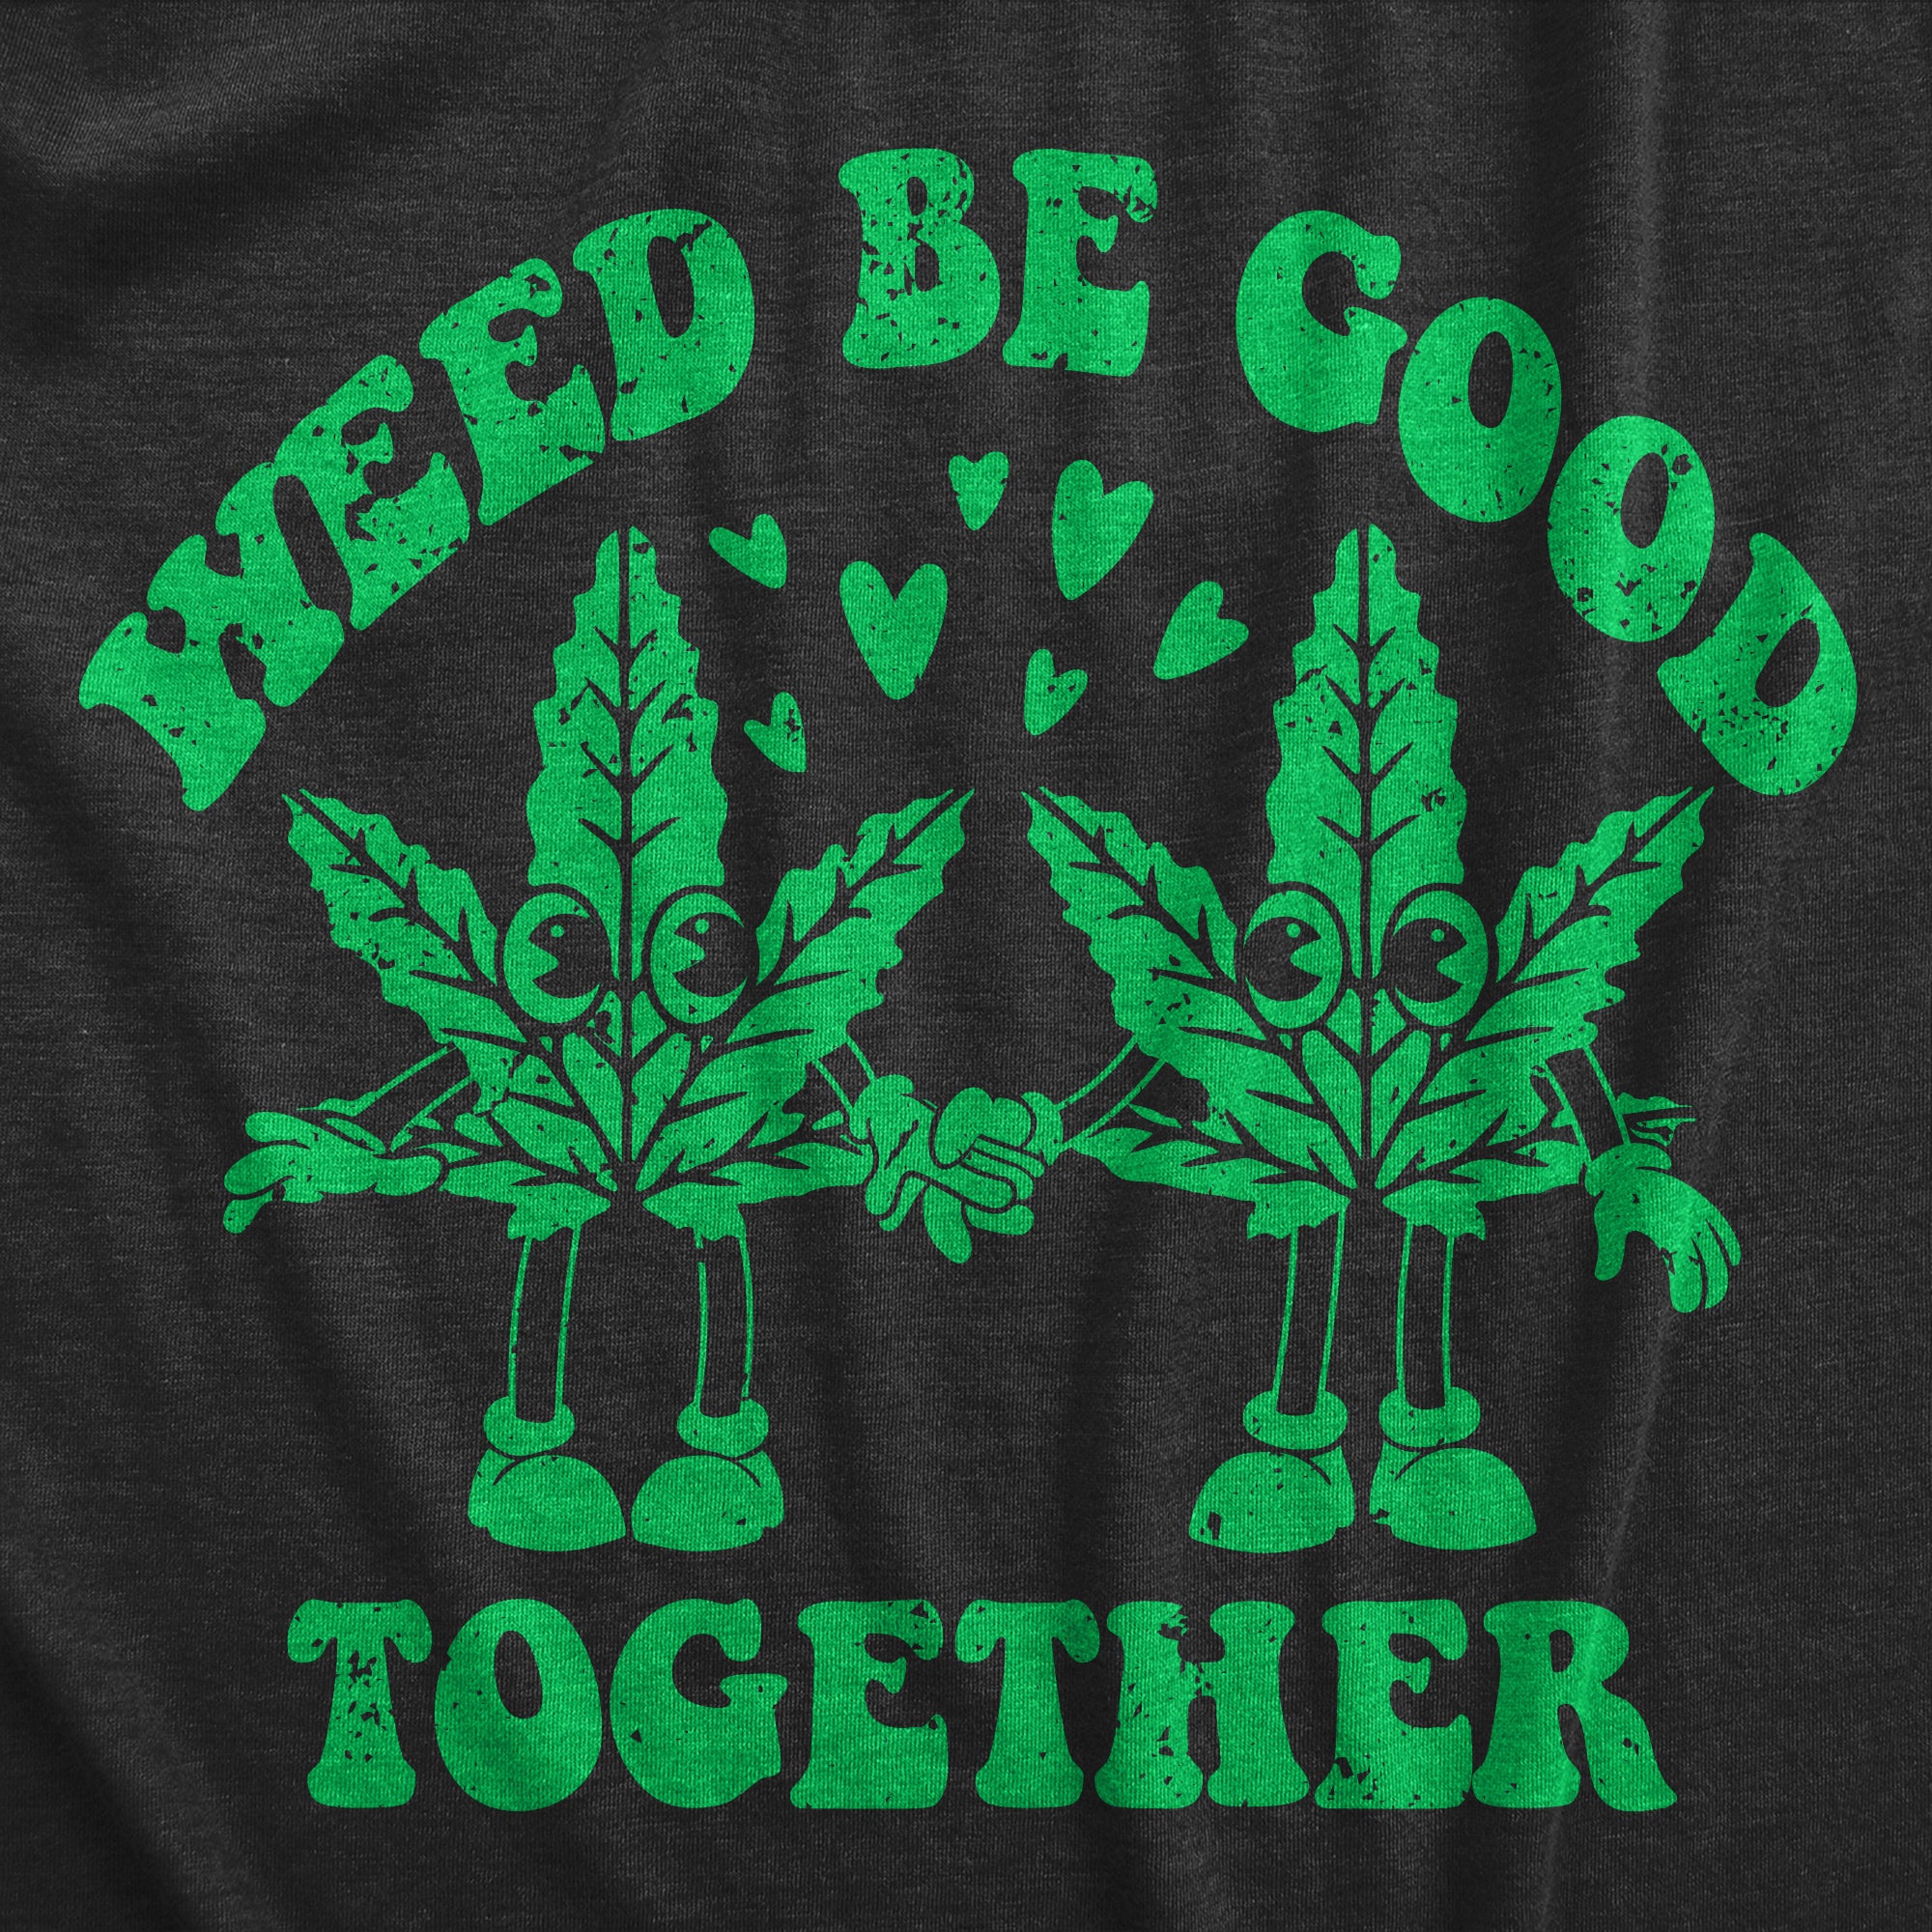 Funny Heather Black - Weed Be Good Together Weed Be Good Together Womens T Shirt Nerdy 420 sarcastic Tee